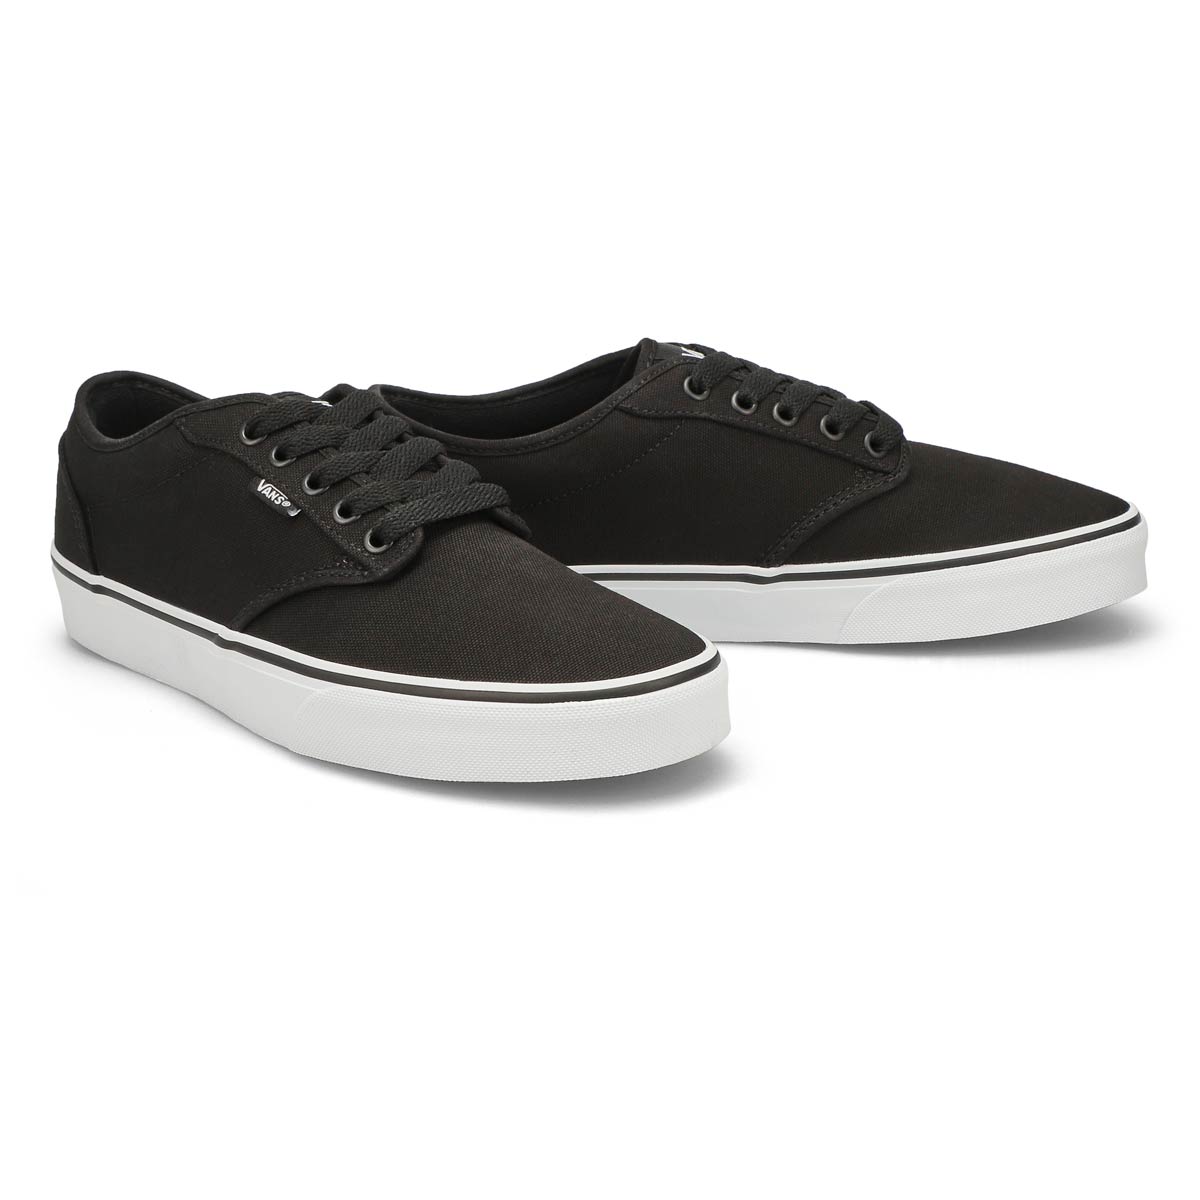 Vans Men's Atwood Canvas Lace Up Sneaker - Ro | SoftMoc.com